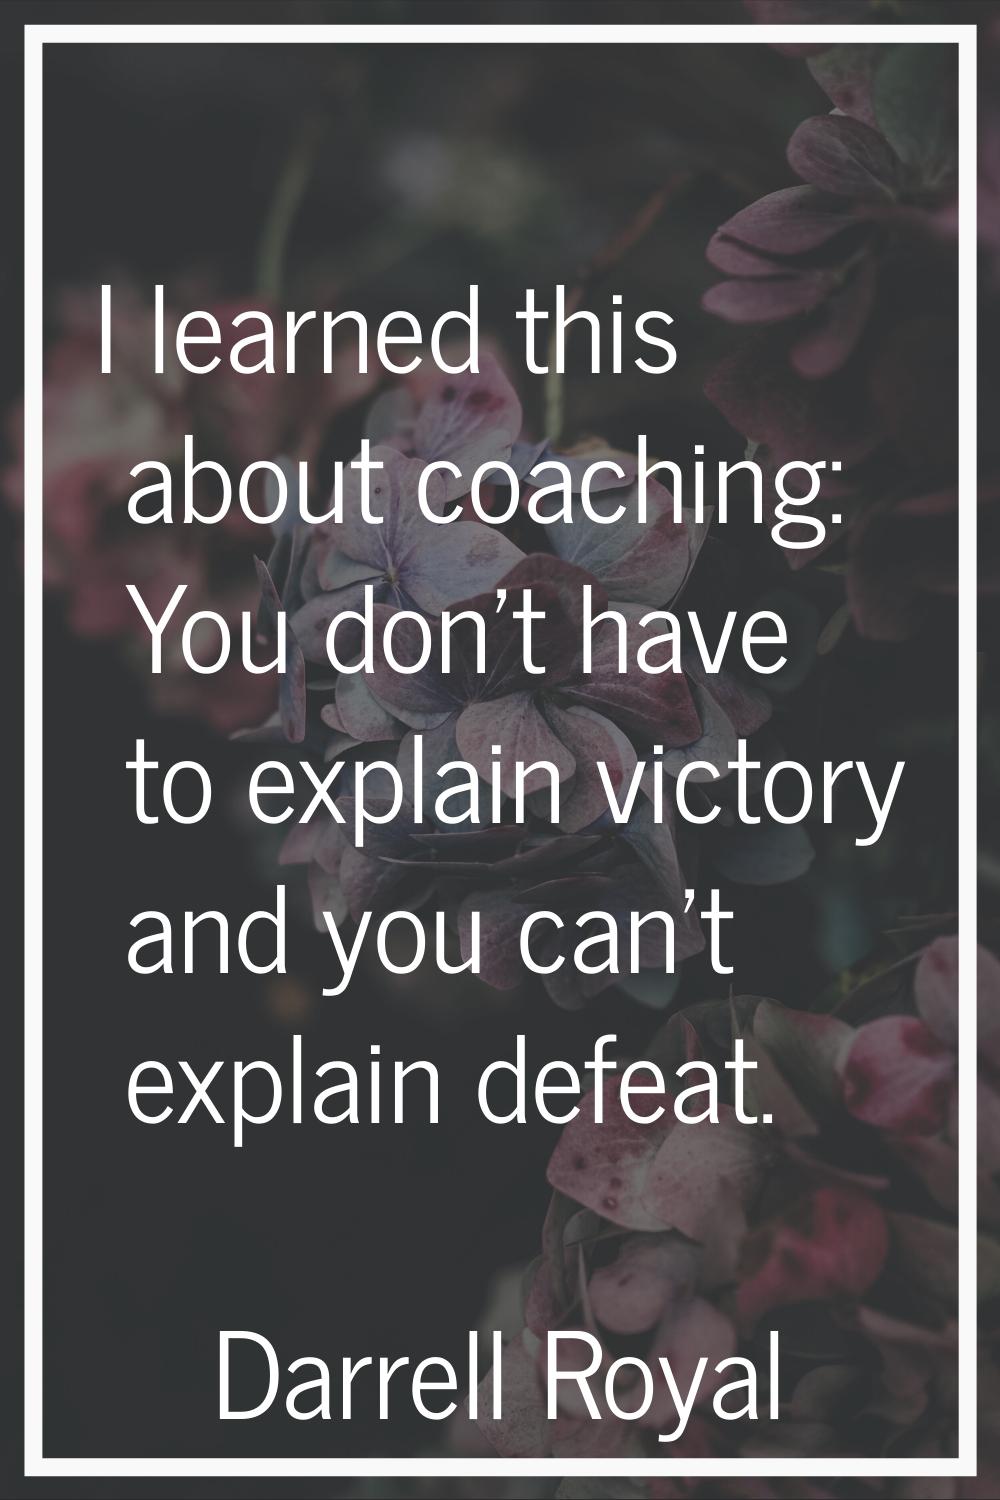 I learned this about coaching: You don't have to explain victory and you can't explain defeat.